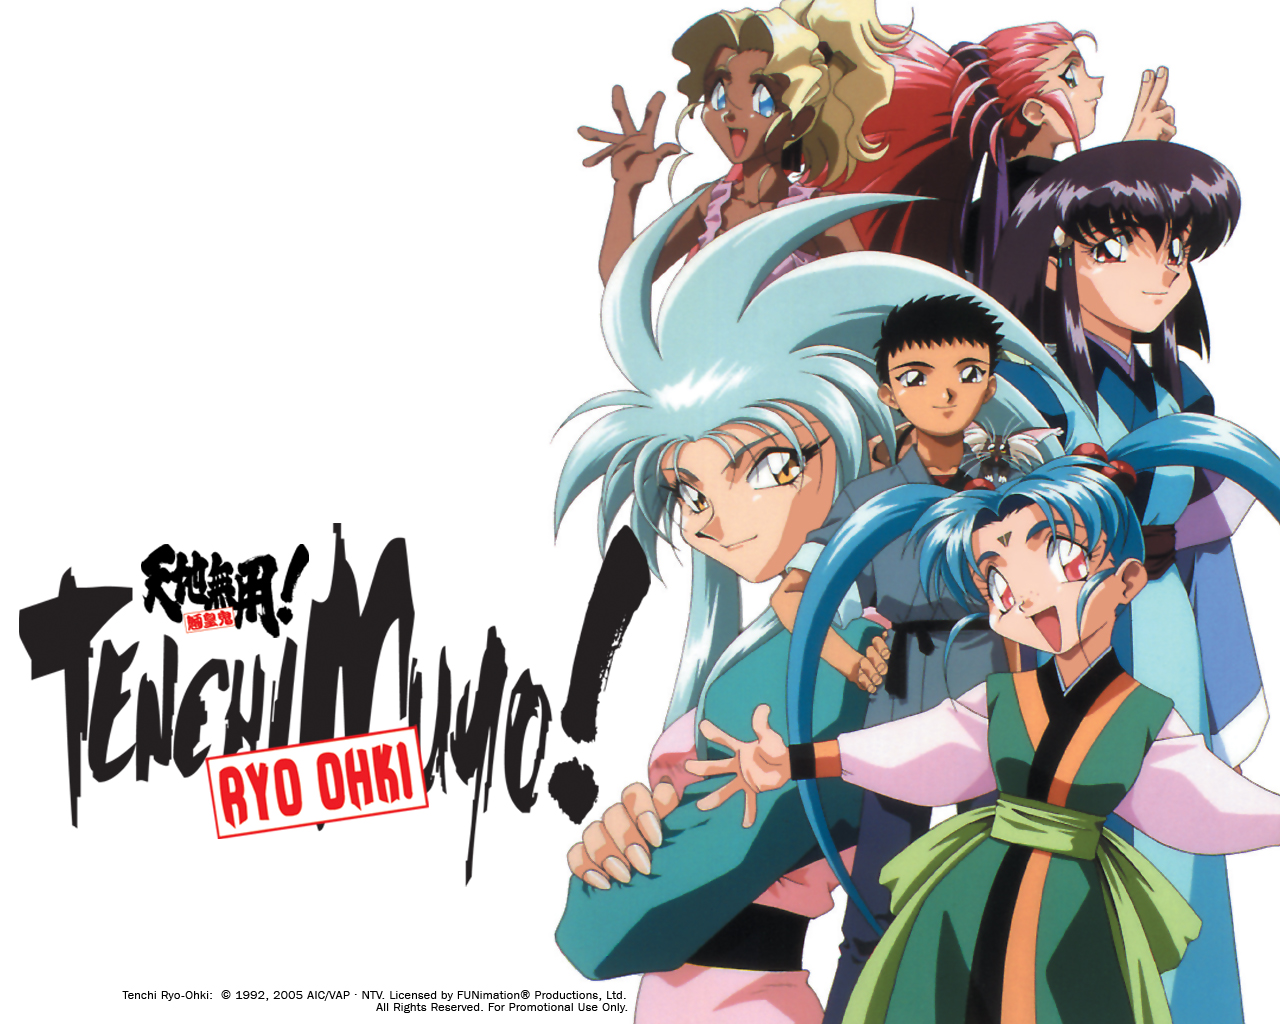 Amazing Tenchi Muyo! Pictures & Backgrounds